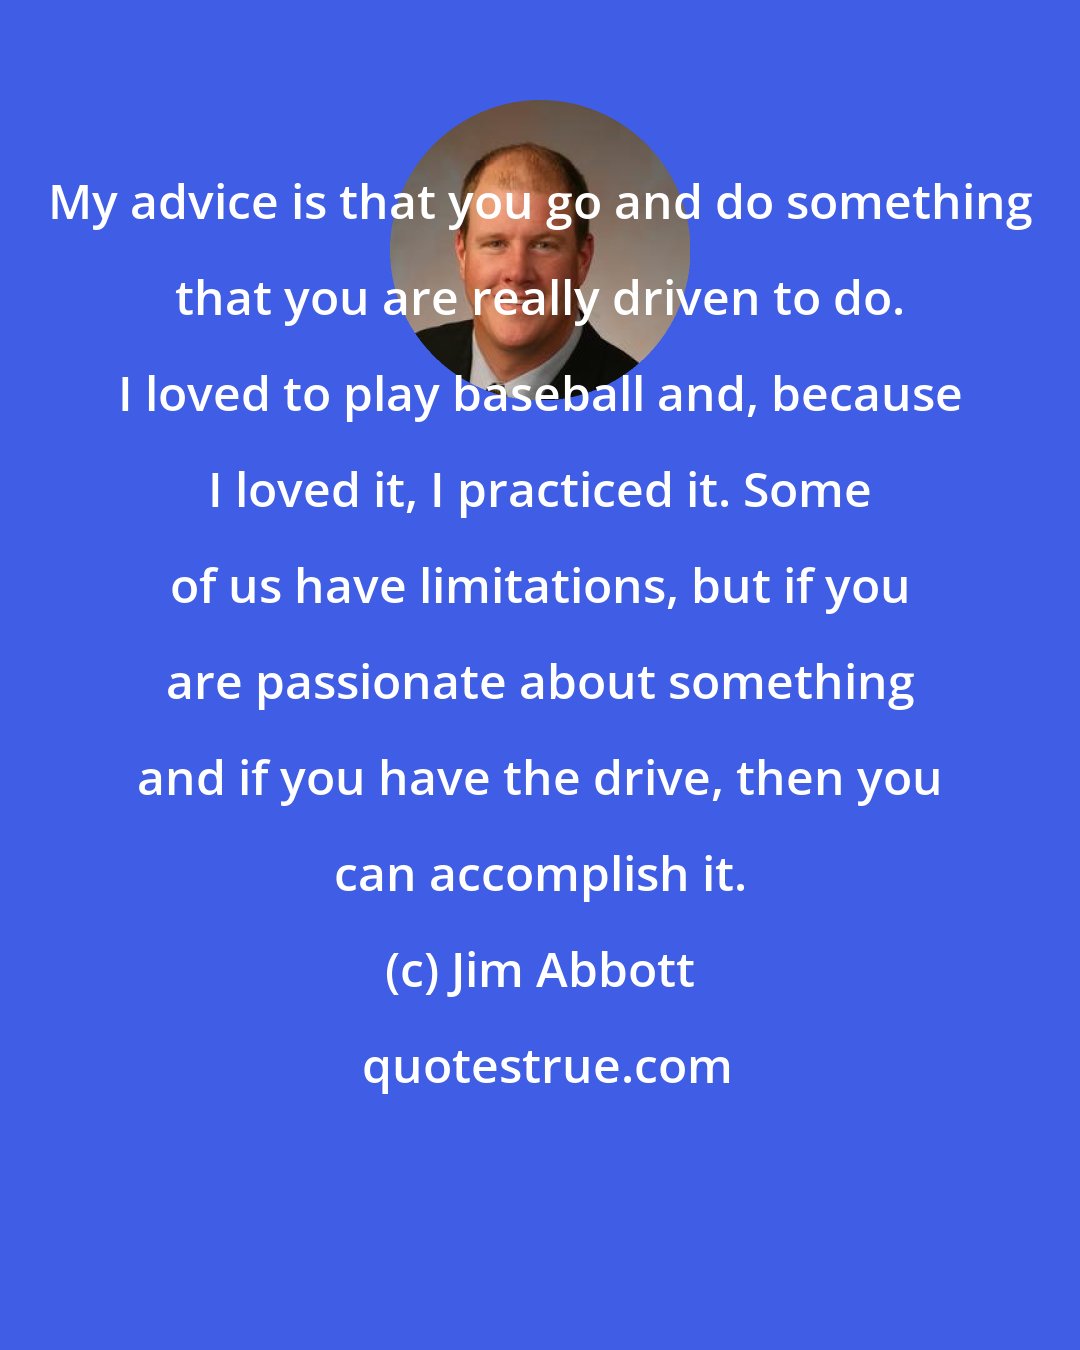 Jim Abbott: My advice is that you go and do something that you are really driven to do. I loved to play baseball and, because I loved it, I practiced it. Some of us have limitations, but if you are passionate about something and if you have the drive, then you can accomplish it.